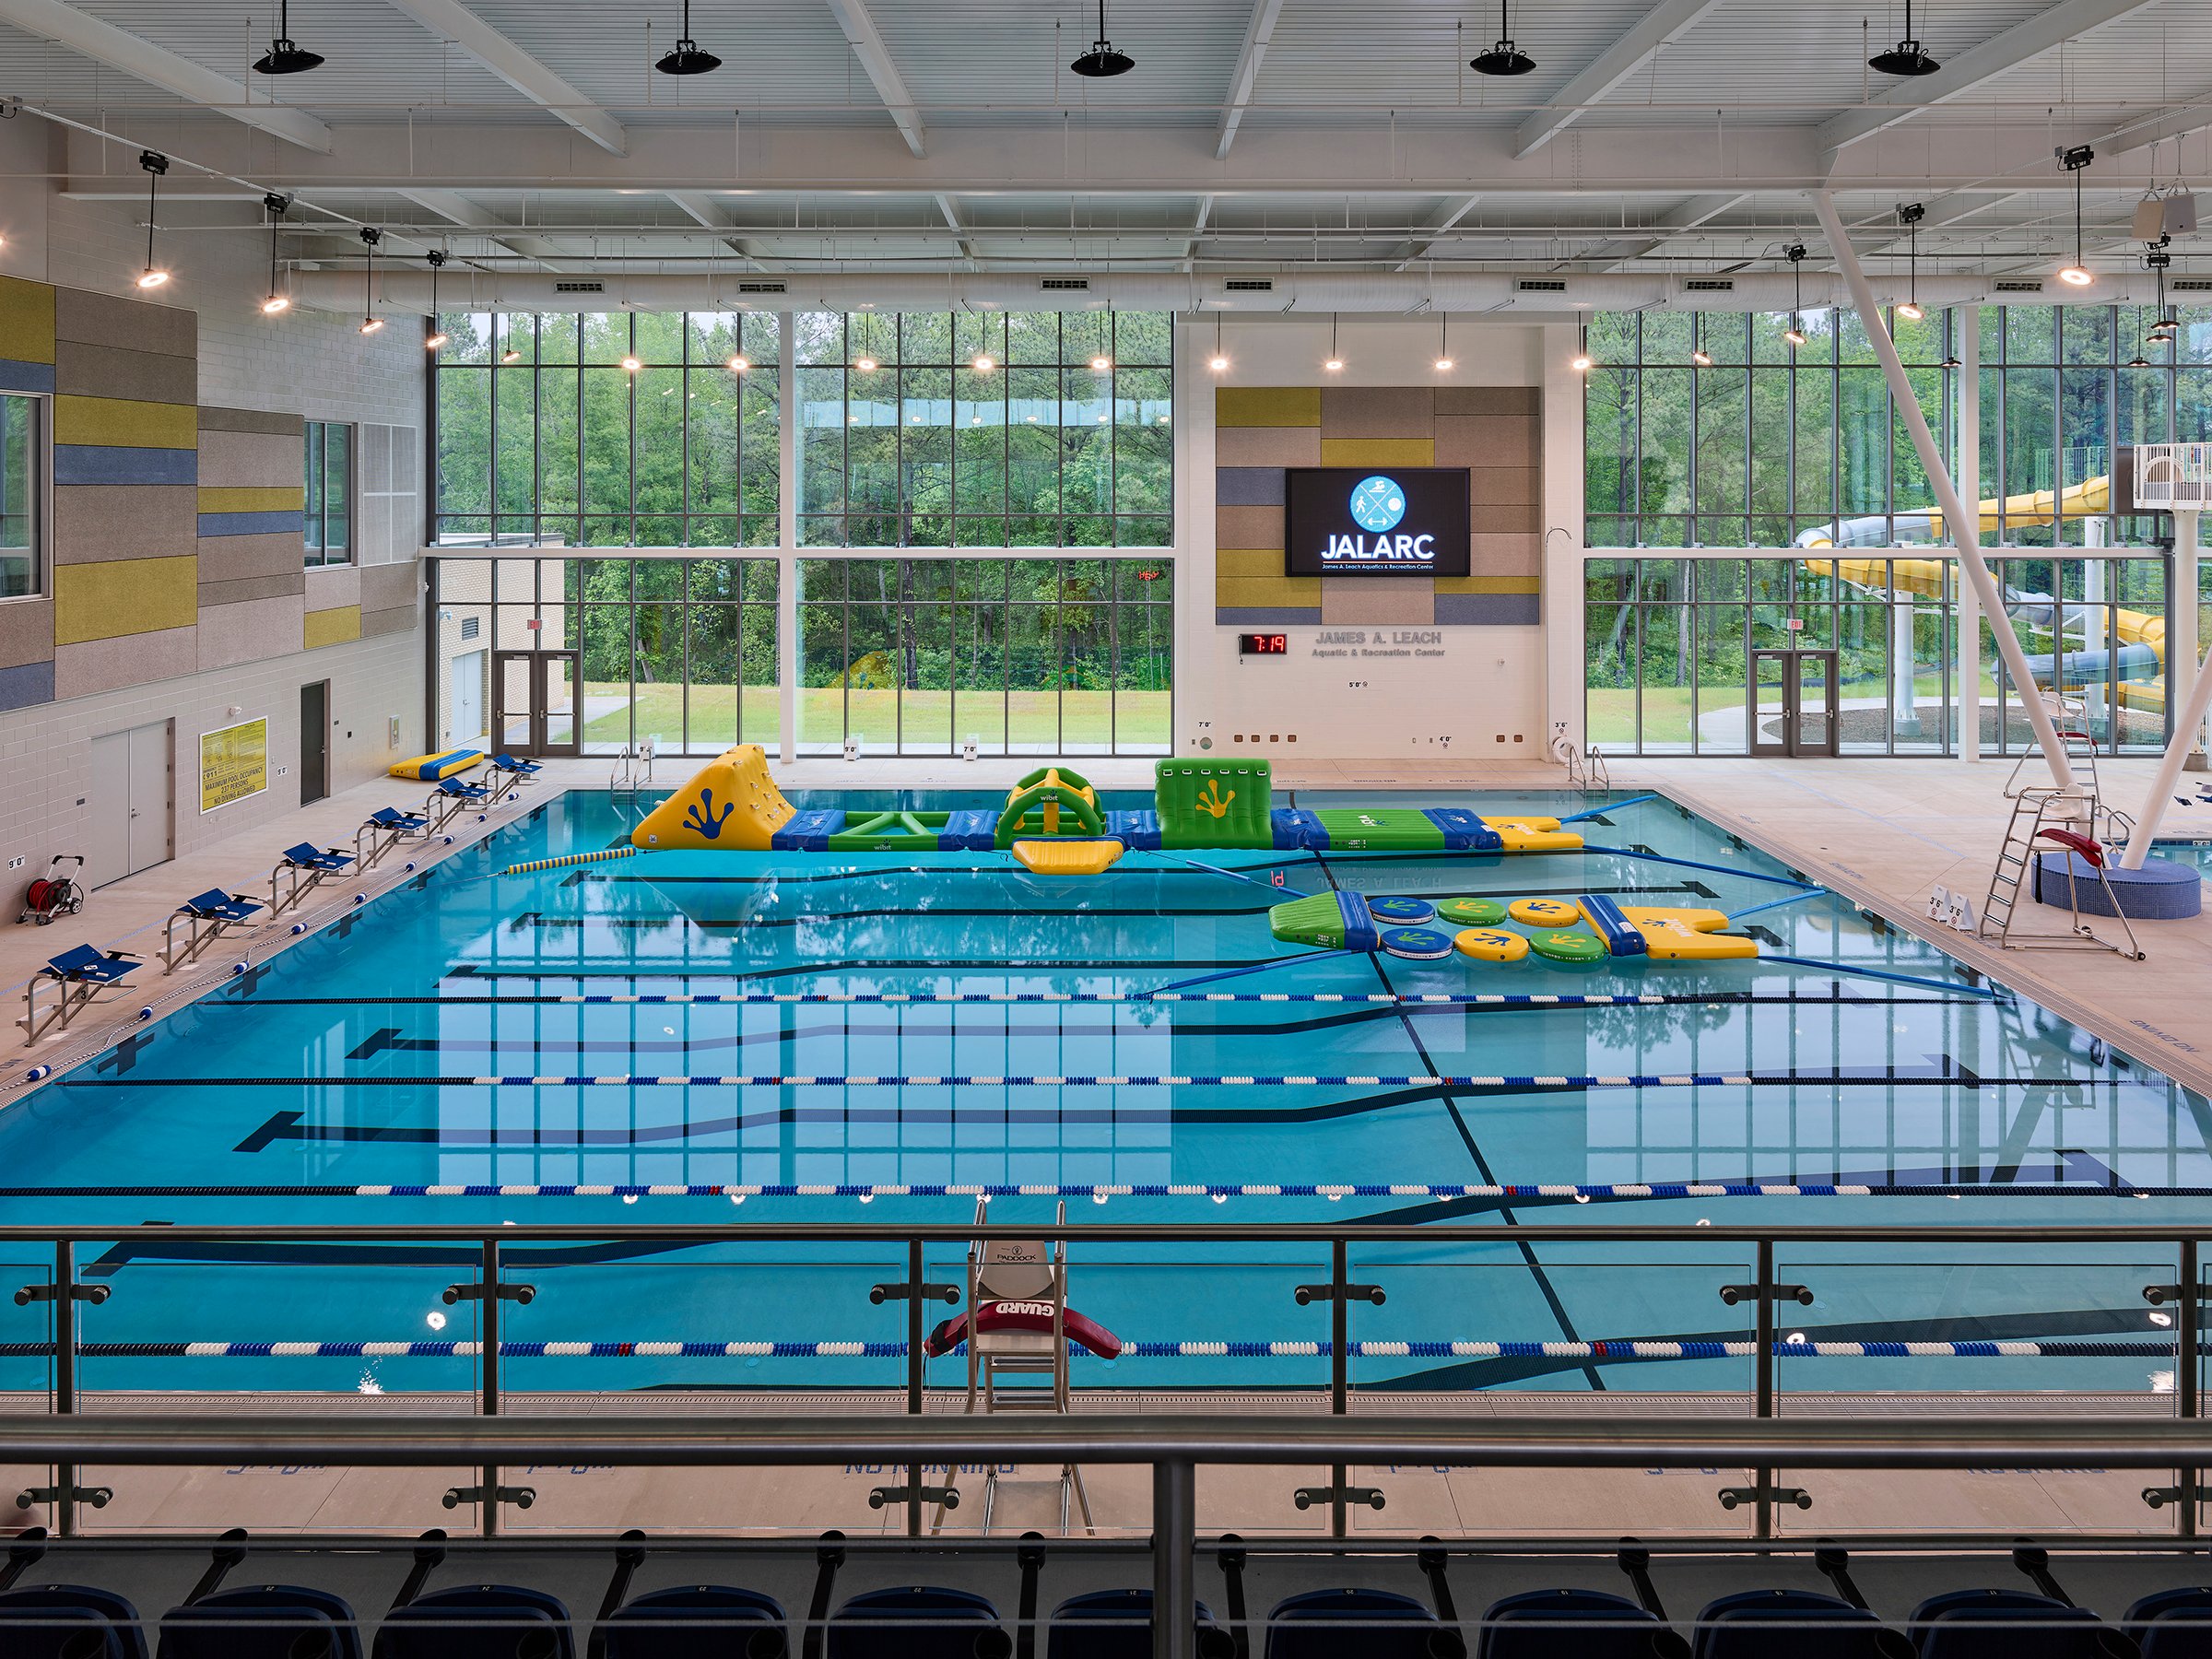 LED Video Display over an indoor pool